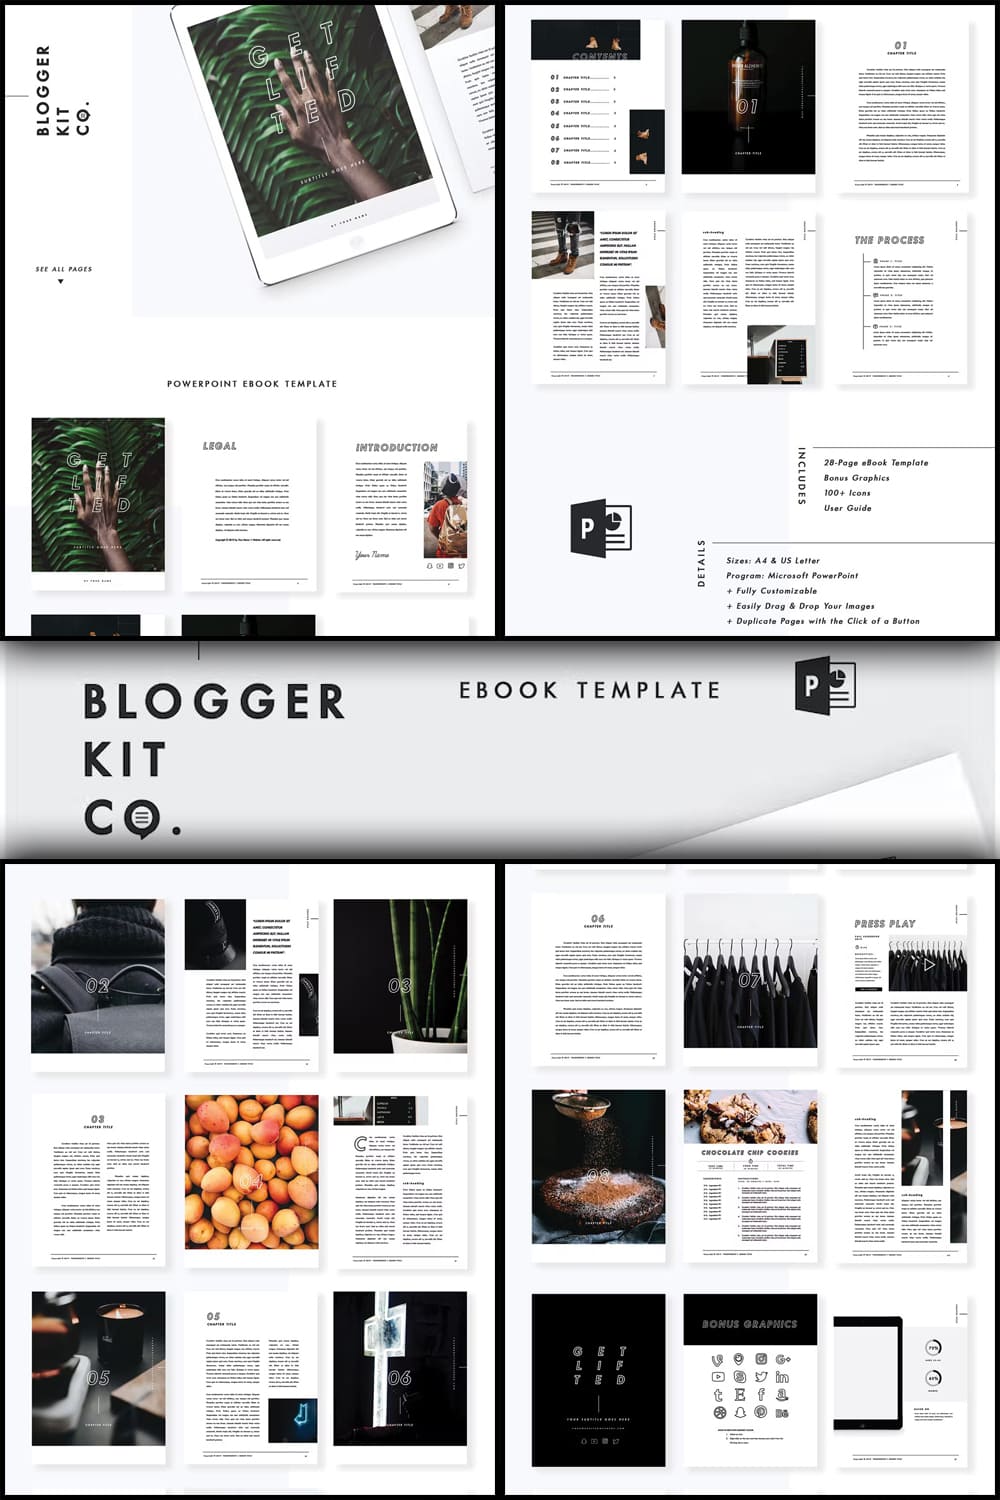 Ebook template 28 pages powerpoint, picture for pinterest 1000x1500.